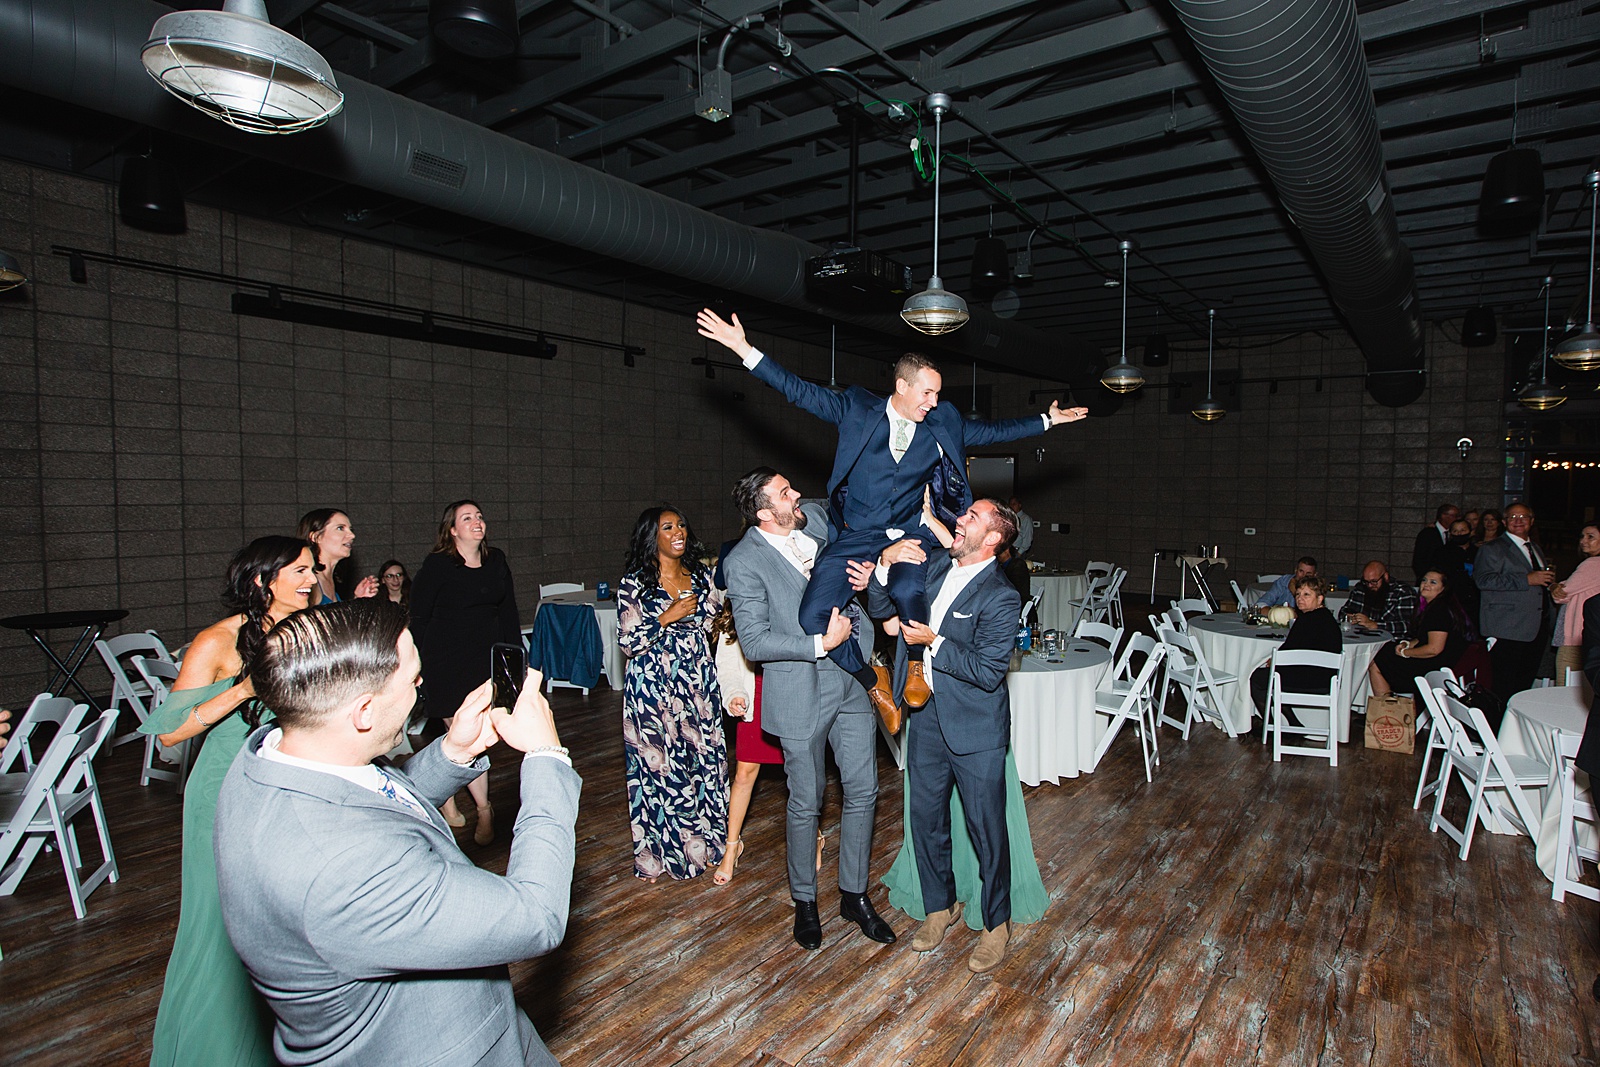 Guests dancing together at Papago Events wedding reception by Phoenix wedding photographer PMA Photography